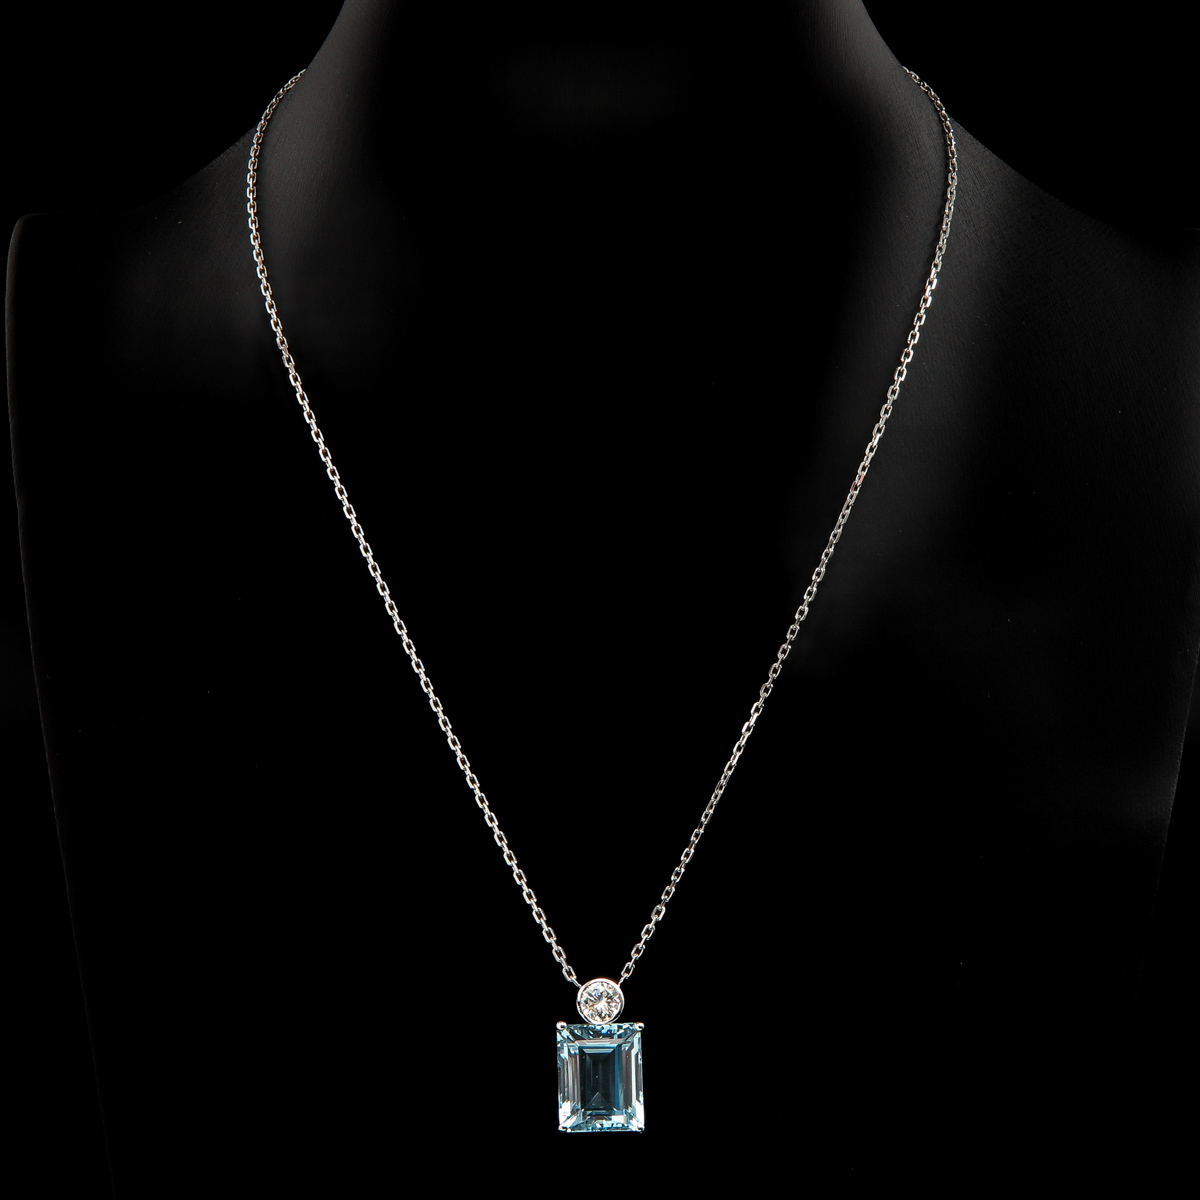 A Necklace with Emerald Cut Aquamarine and Diamond Pendant - Image 2 of 6